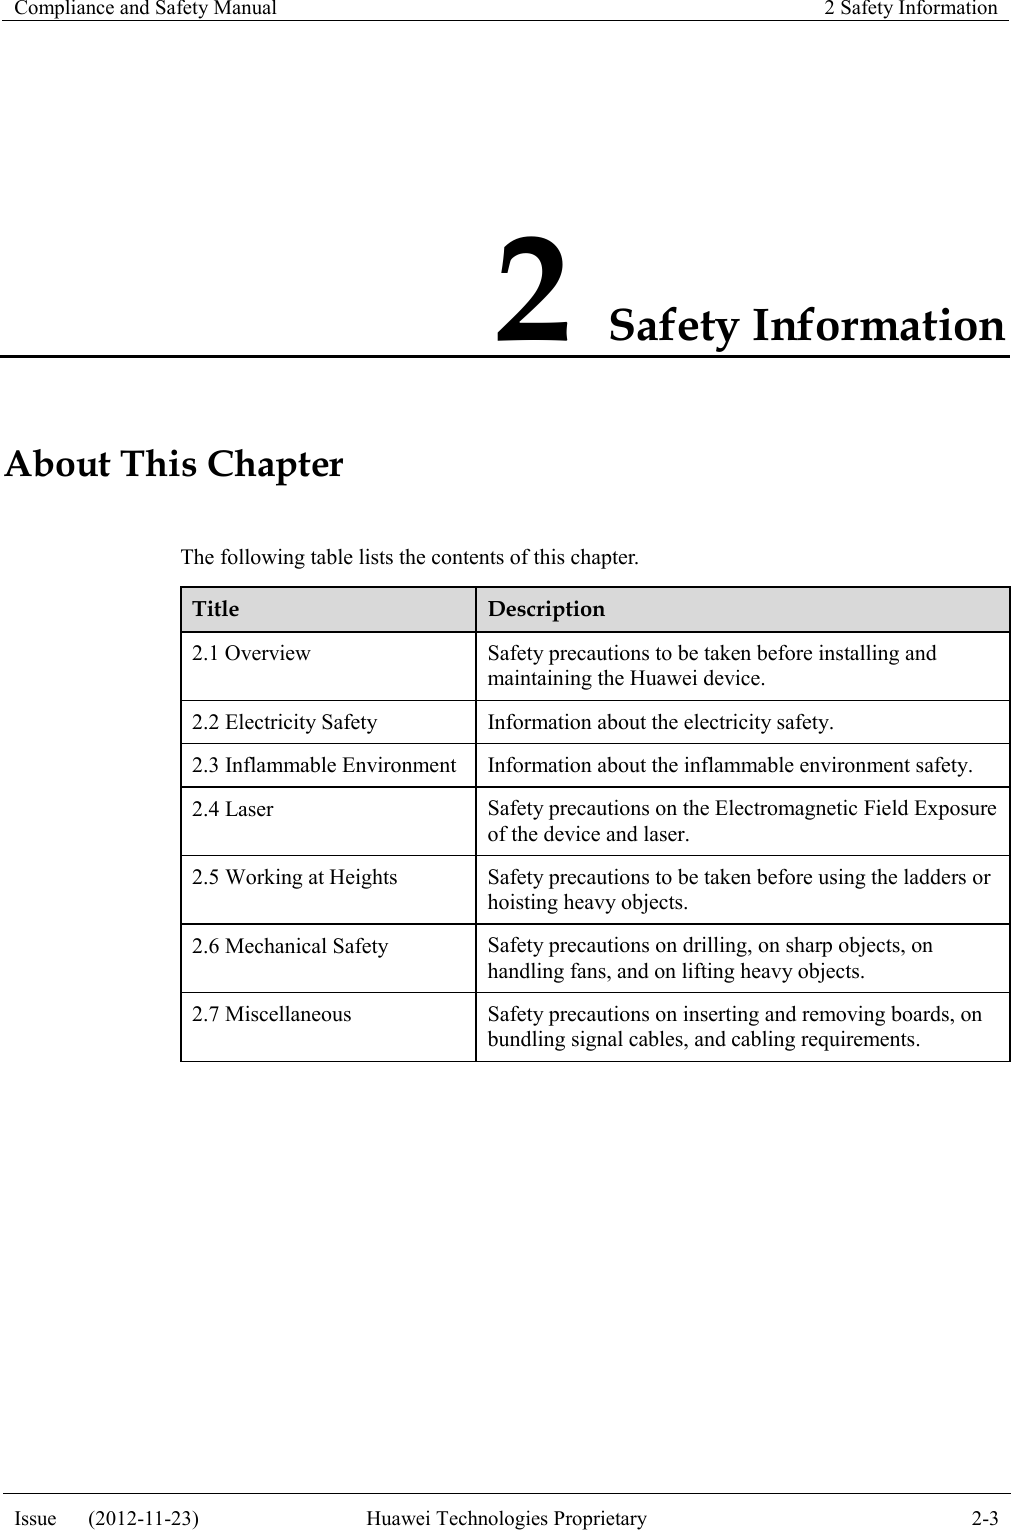 Compliance and Safety Manual 2 Safety Information  Issue      (2012-11-23) Huawei Technologies Proprietary 2-3  2 Safety Information About This Chapter The following table lists the contents of this chapter. Title Description 2.1 Overview Safety precautions to be taken before installing and maintaining the Huawei device. 2.2 Electricity Safety Information about the electricity safety. 2.3 Inflammable Environment Information about the inflammable environment safety. 2.4 Laser Safety precautions on the Electromagnetic Field Exposure of the device and laser. 2.5 Working at Heights Safety precautions to be taken before using the ladders or hoisting heavy objects. 2.6 Mechanical Safety Safety precautions on drilling, on sharp objects, on handling fans, and on lifting heavy objects. 2.7 Miscellaneous Safety precautions on inserting and removing boards, on bundling signal cables, and cabling requirements.  